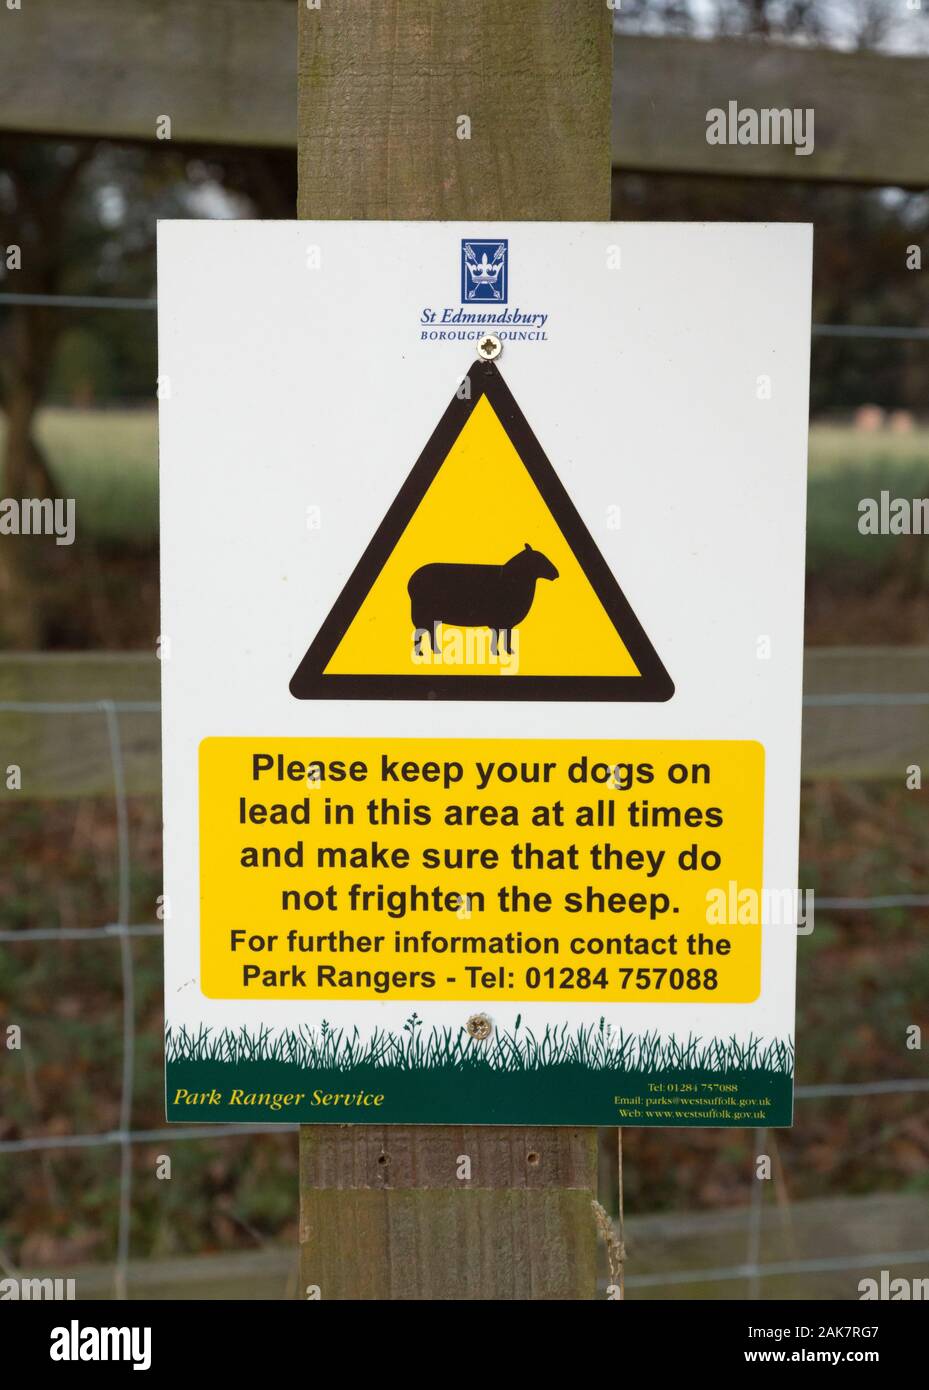 A sign requesting dogs are kept on a lead at all times in area sheep are grazing Stock Photo